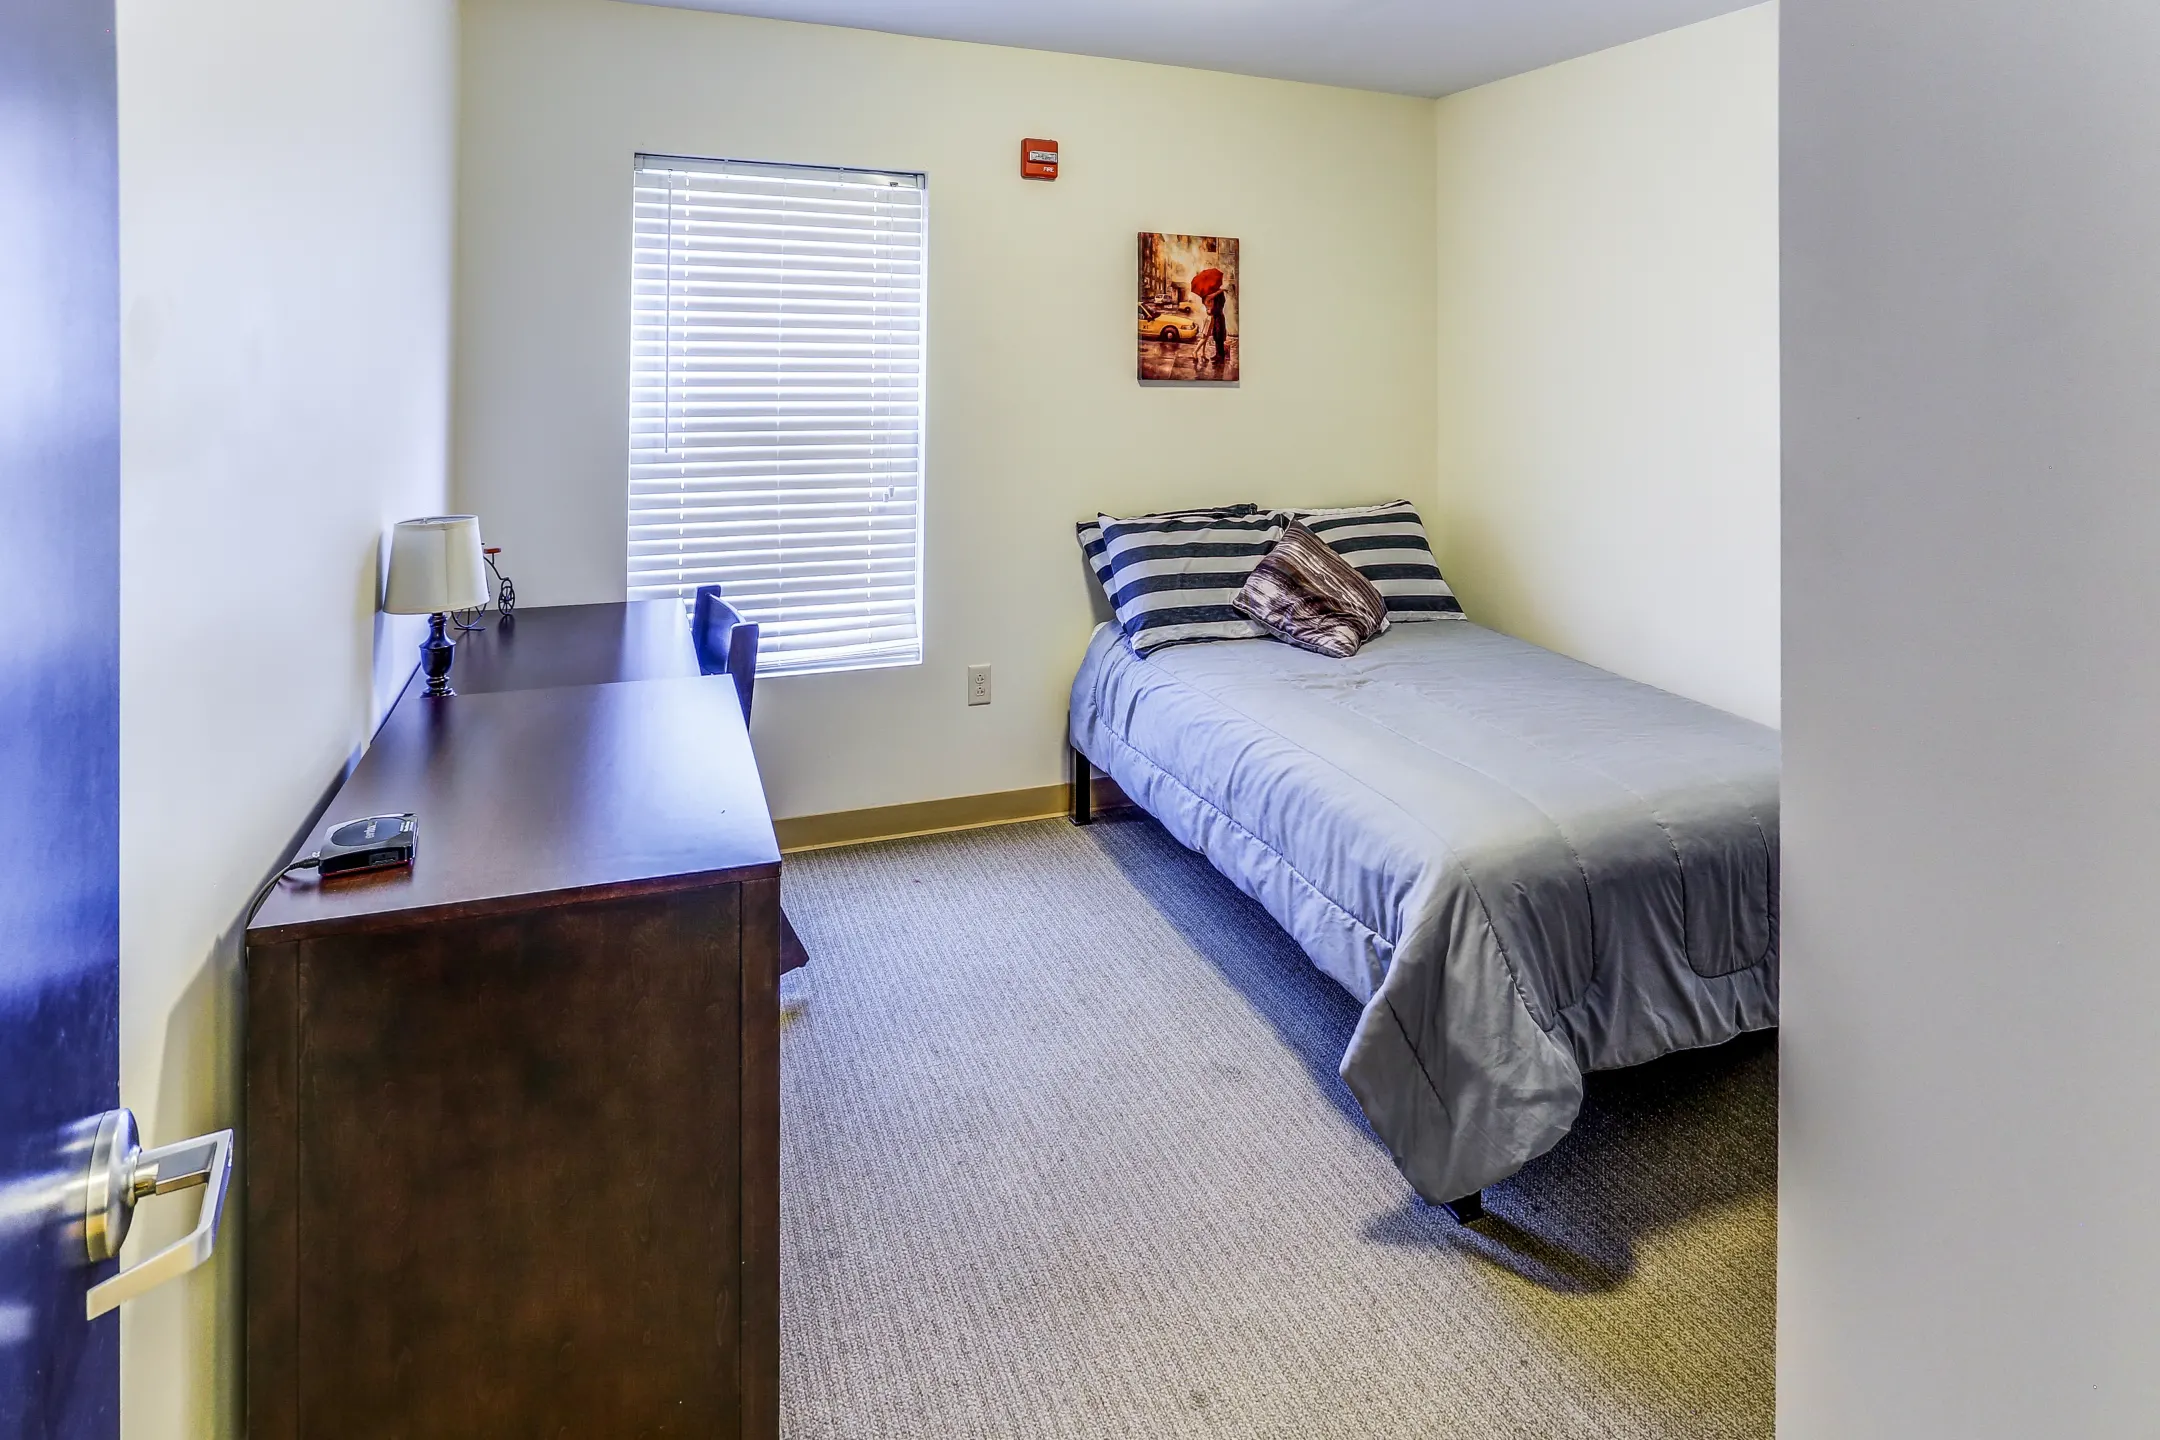 Bedroom - Copper Beech Commons - Per Bed Lease - Syracuse, NY